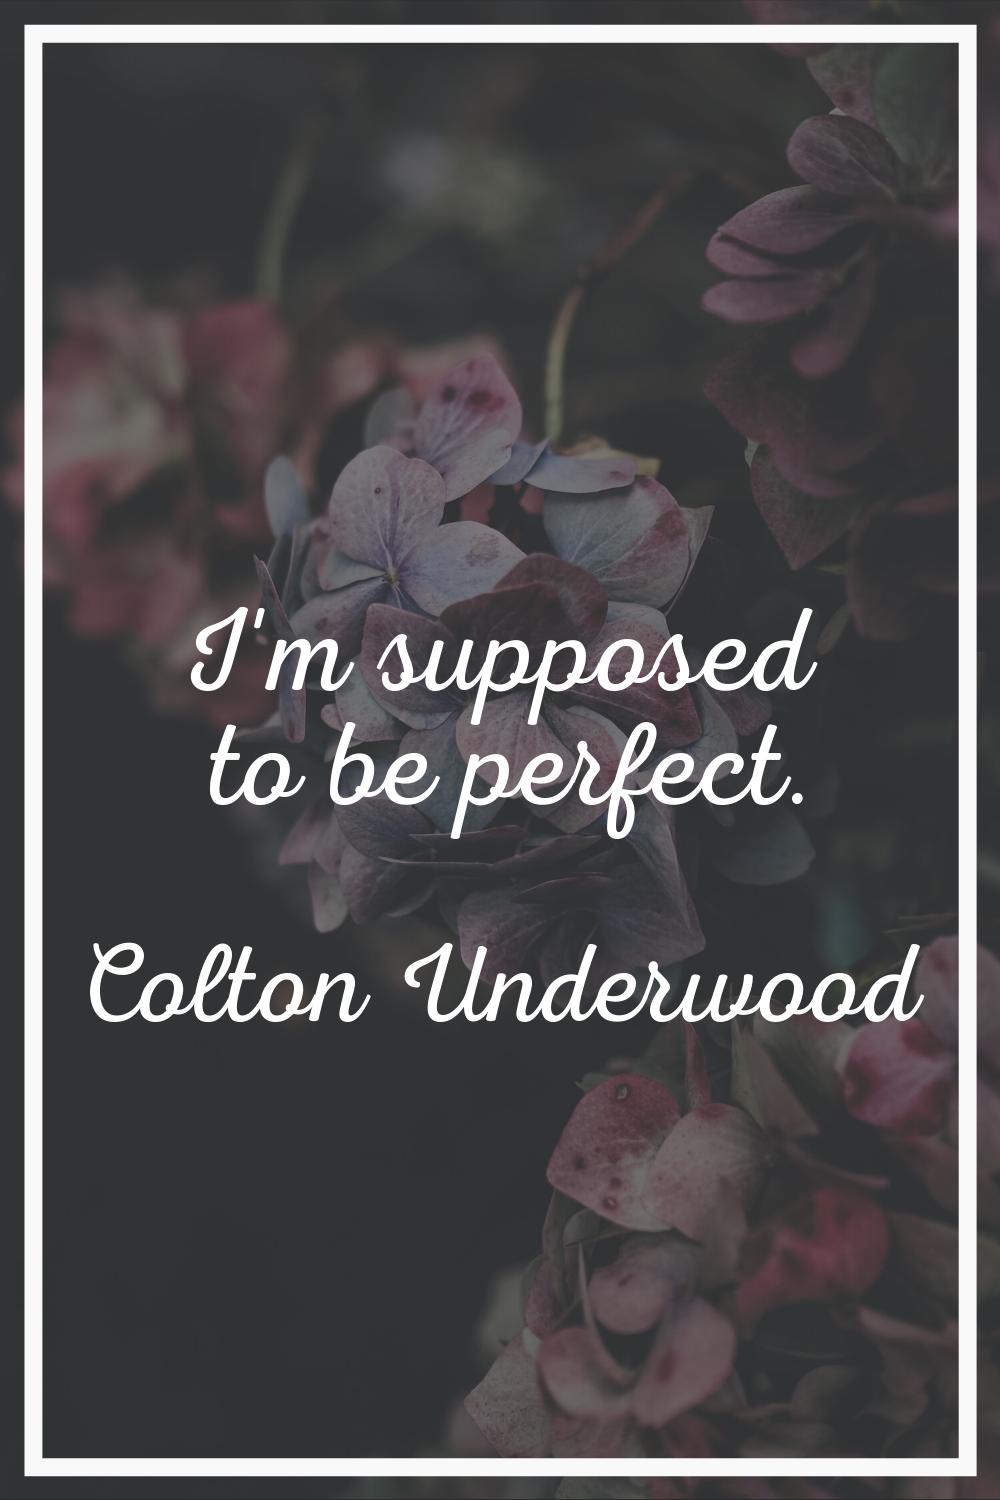 I'm supposed to be perfect.